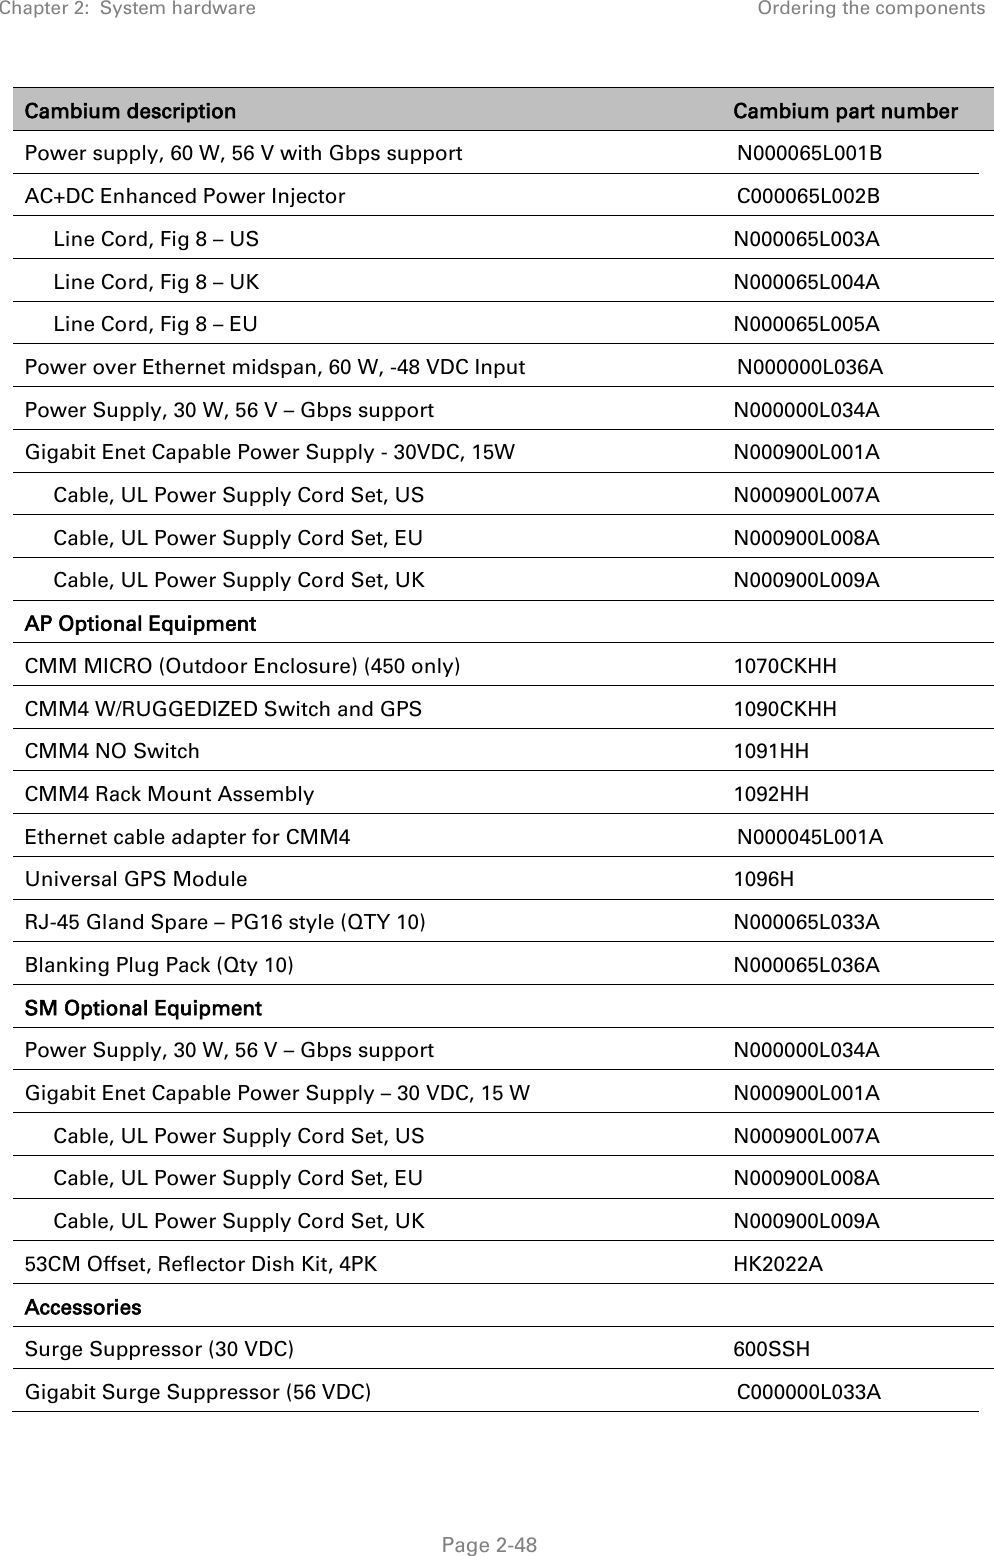 Chapter 2:  System hardware Ordering the components   Page 2-48 Cambium description Cambium part number Power supply, 60 W, 56 V with Gbps support N000065L001B AC+DC Enhanced Power Injector C000065L002B      Line Cord, Fig 8 – US N000065L003A      Line Cord, Fig 8 – UK N000065L004A      Line Cord, Fig 8 – EU N000065L005A Power over Ethernet midspan, 60 W, -48 VDC Input N000000L036A Power Supply, 30 W, 56 V – Gbps support N000000L034A Gigabit Enet Capable Power Supply - 30VDC, 15W N000900L001A      Cable, UL Power Supply Cord Set, US N000900L007A      Cable, UL Power Supply Cord Set, EU N000900L008A      Cable, UL Power Supply Cord Set, UK N000900L009A AP Optional Equipment  CMM MICRO (Outdoor Enclosure) (450 only) 1070CKHH CMM4 W/RUGGEDIZED Switch and GPS 1090CKHH CMM4 NO Switch 1091HH CMM4 Rack Mount Assembly 1092HH Ethernet cable adapter for CMM4 N000045L001A Universal GPS Module 1096H RJ-45 Gland Spare – PG16 style (QTY 10) N000065L033A Blanking Plug Pack (Qty 10) N000065L036A SM Optional Equipment  Power Supply, 30 W, 56 V – Gbps support N000000L034A Gigabit Enet Capable Power Supply – 30 VDC, 15 W N000900L001A      Cable, UL Power Supply Cord Set, US N000900L007A      Cable, UL Power Supply Cord Set, EU N000900L008A      Cable, UL Power Supply Cord Set, UK N000900L009A 53CM Offset, Reflector Dish Kit, 4PK HK2022A Accessories  Surge Suppressor (30 VDC) 600SSH Gigabit Surge Suppressor (56 VDC) C000000L033A 